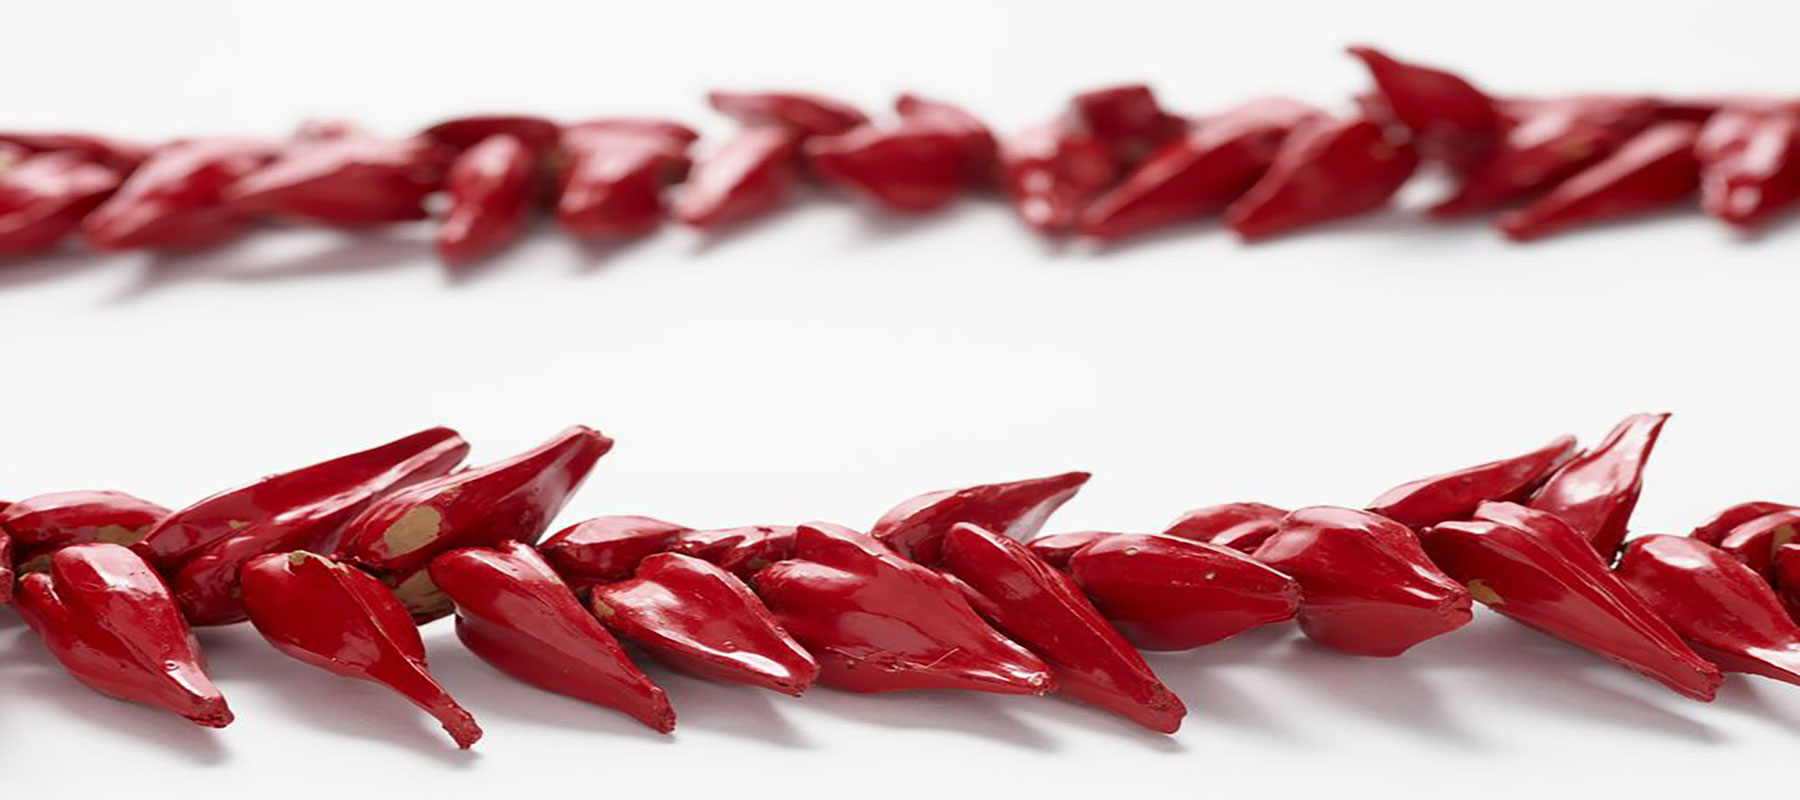 Red seed pods gathered on a string on a white background